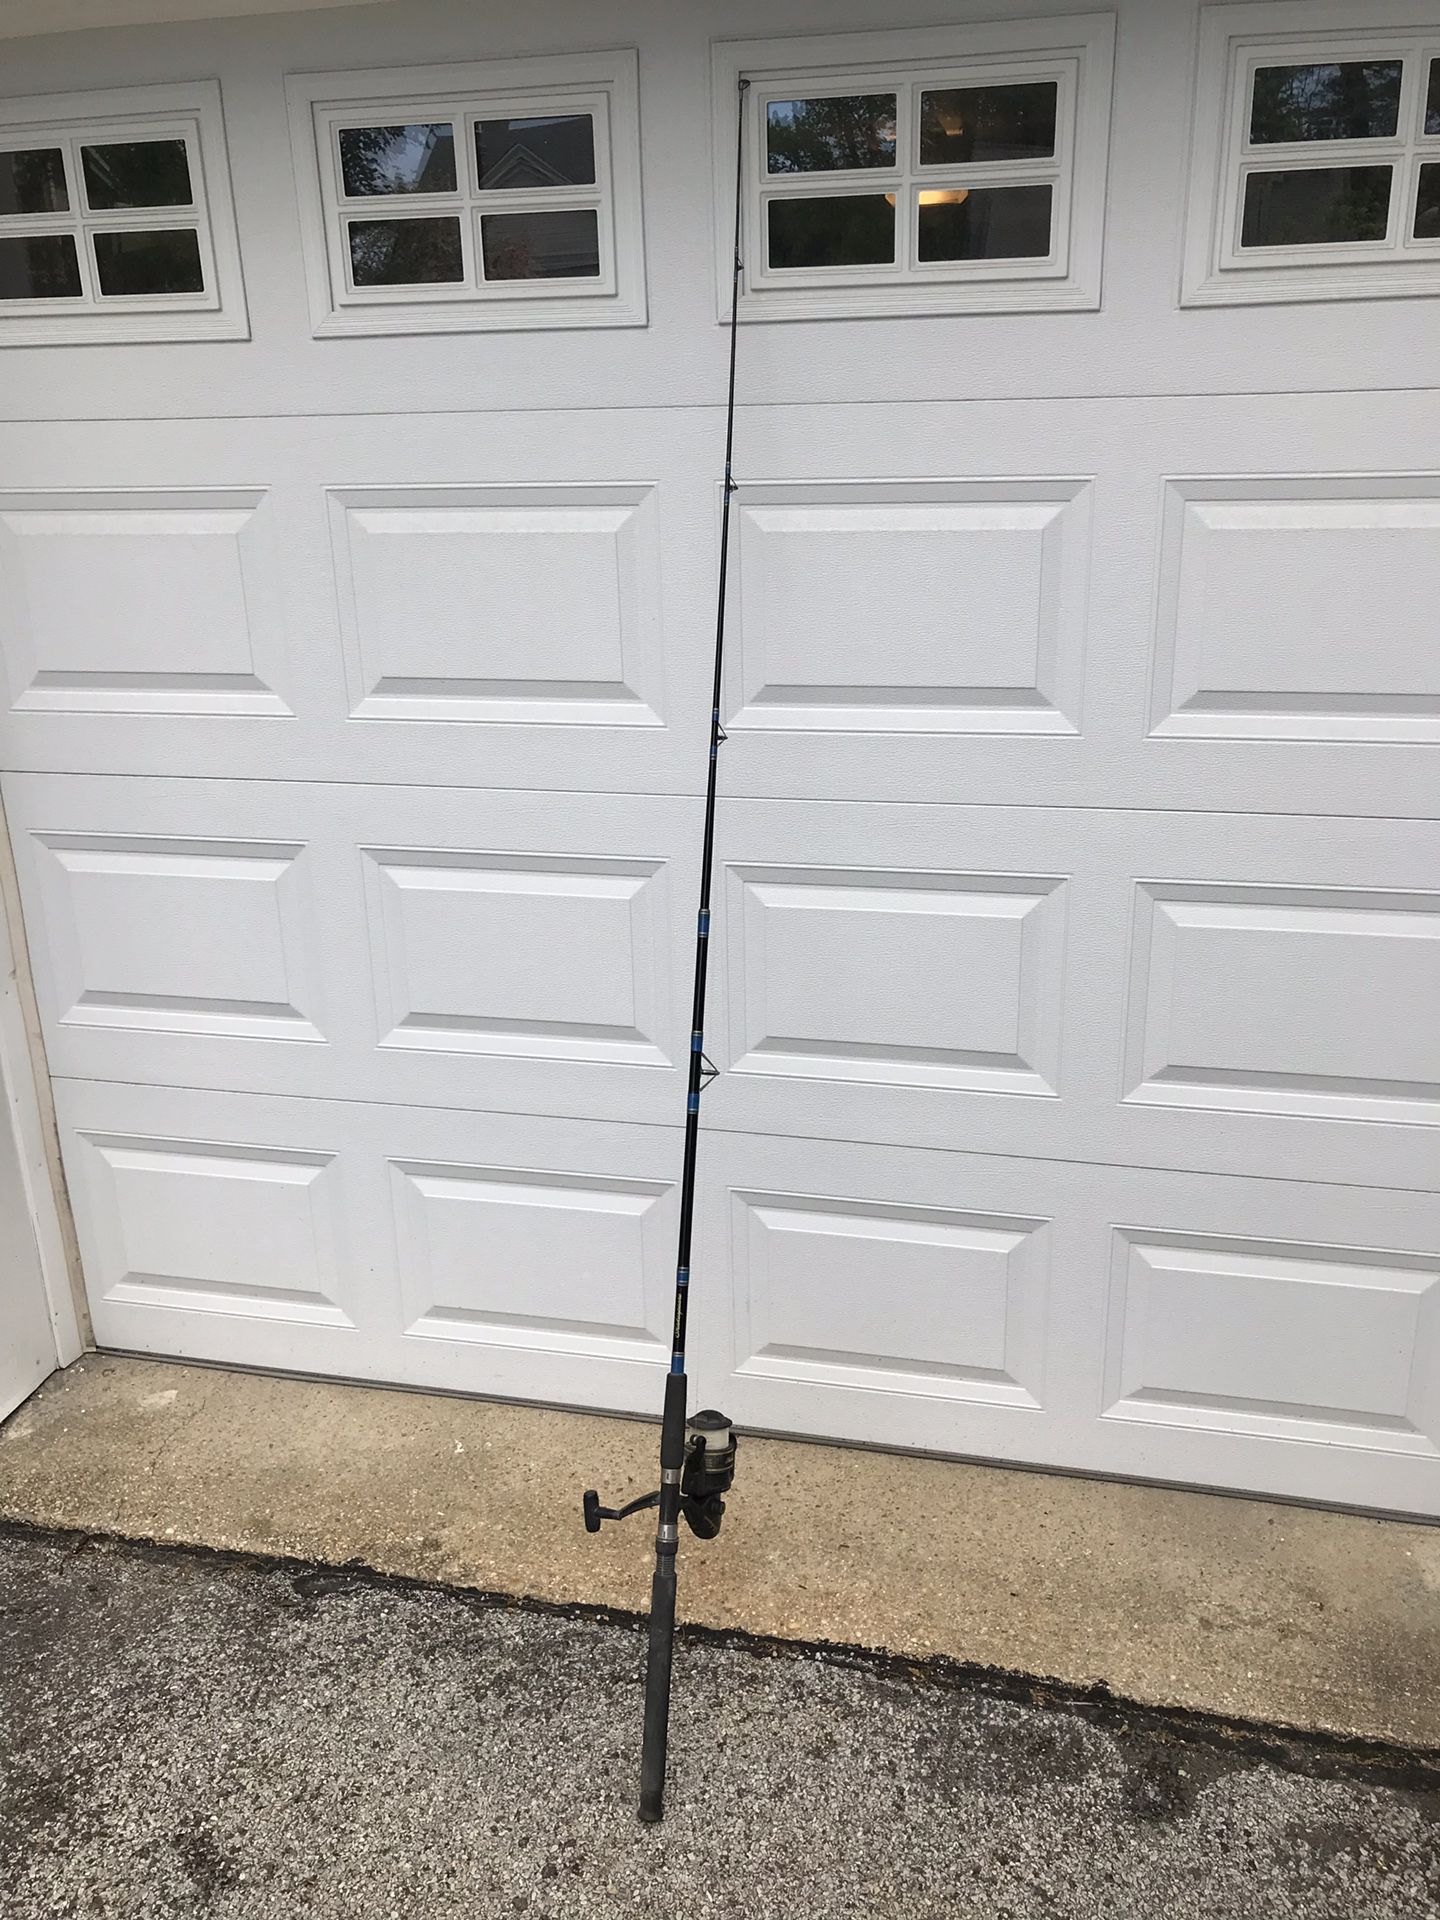 shakespeare fishing pole and reel used